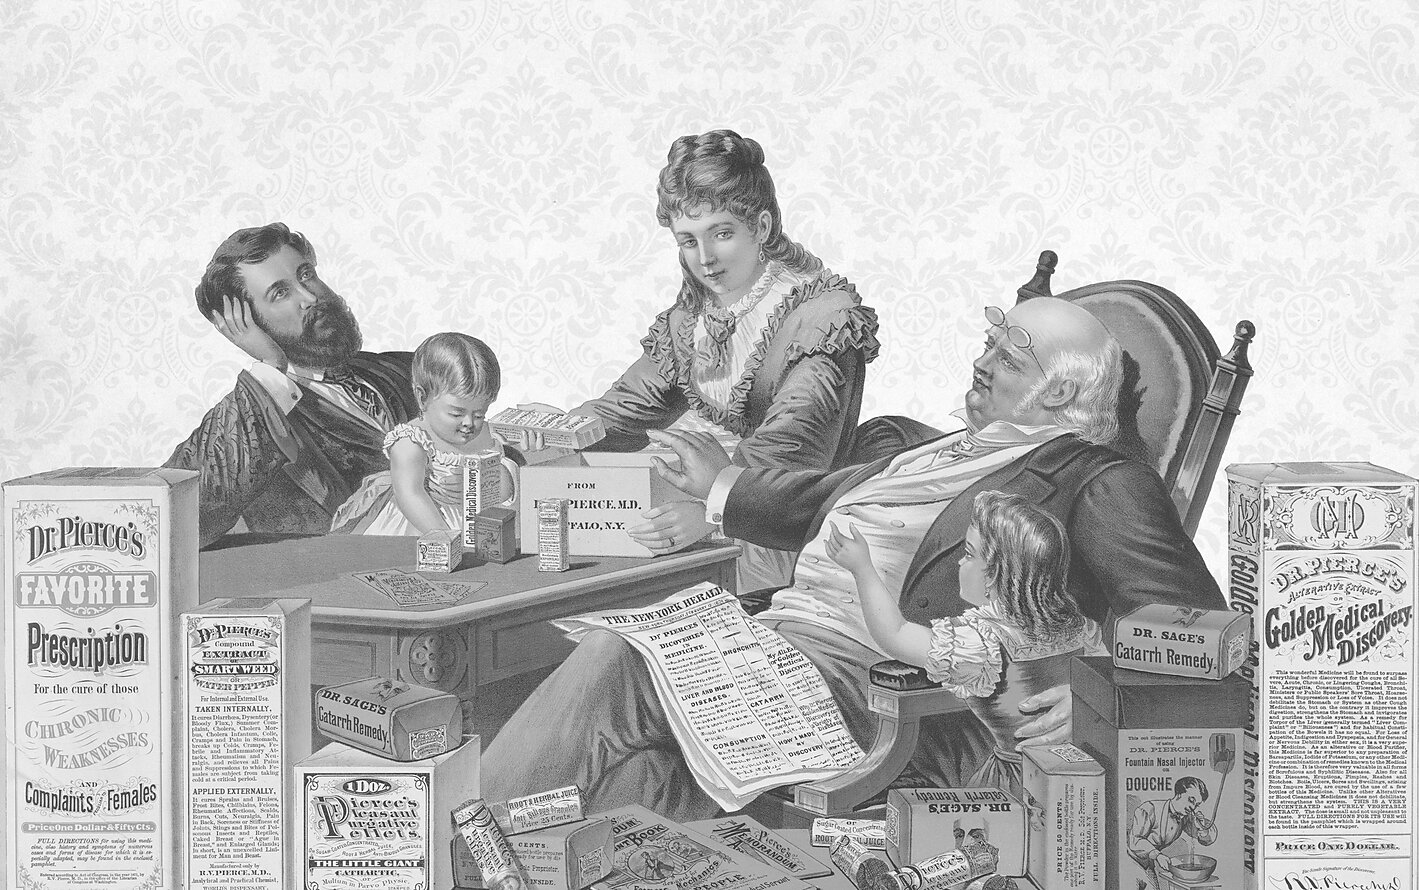 Advertisement for "Dr. Pierce's family medicines," featuring an illustration of a family surrounded by various drugs and medicines from the turn of the century.